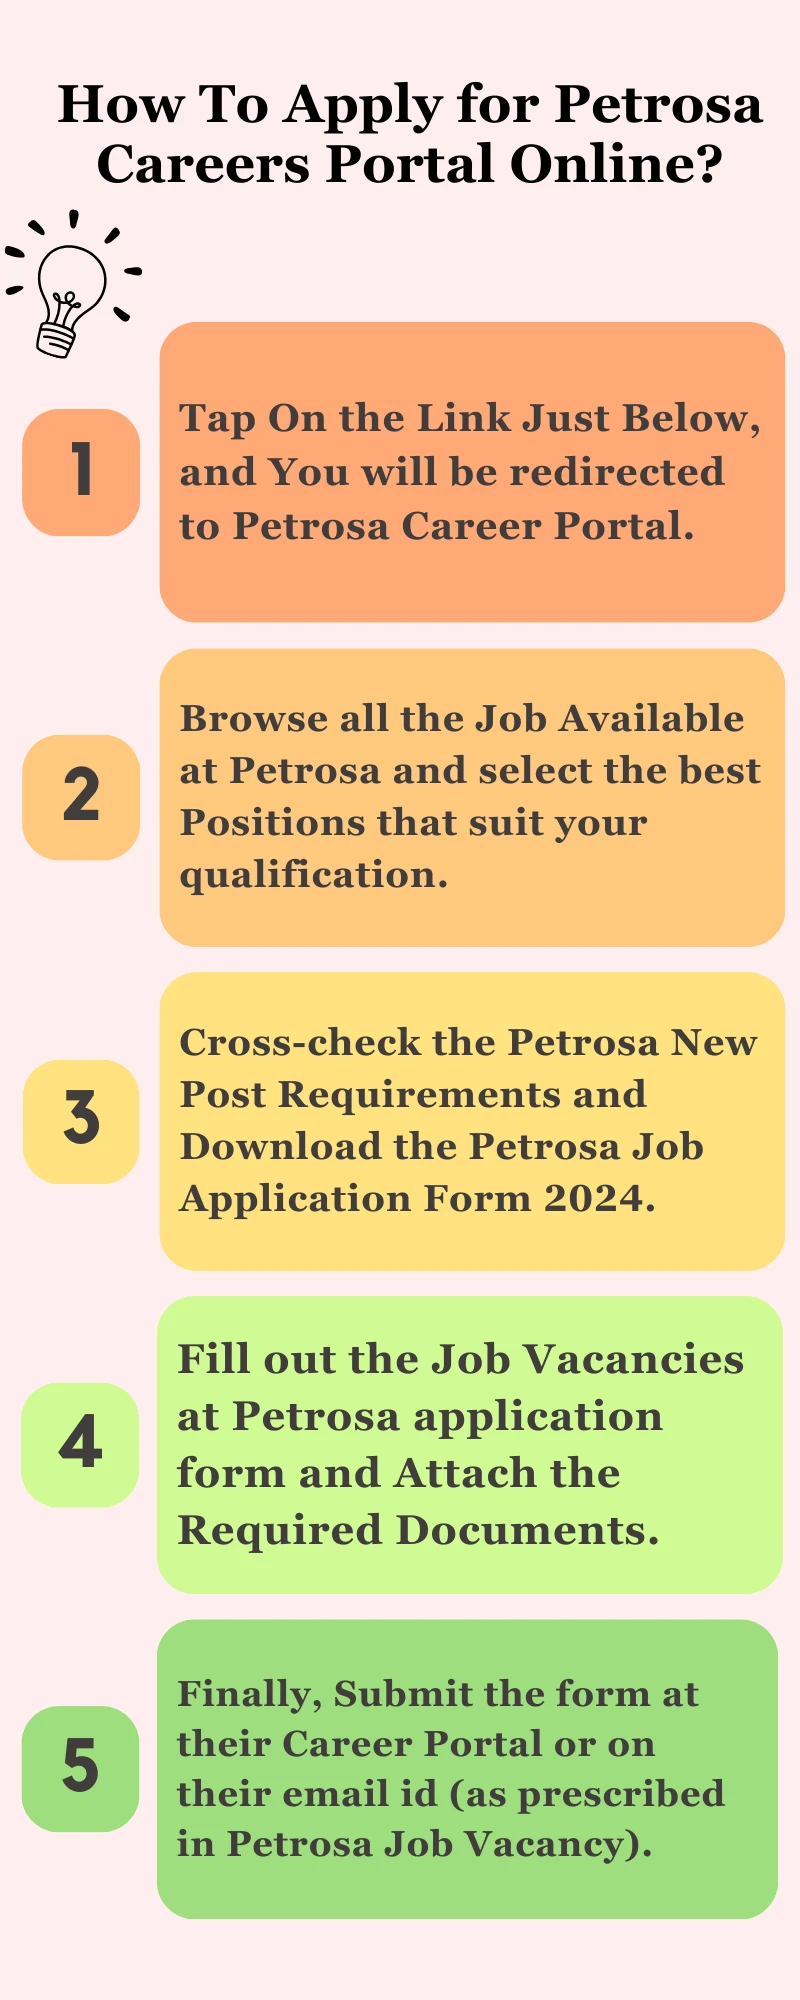 How To Apply for Petrosa Careers Portal Online?